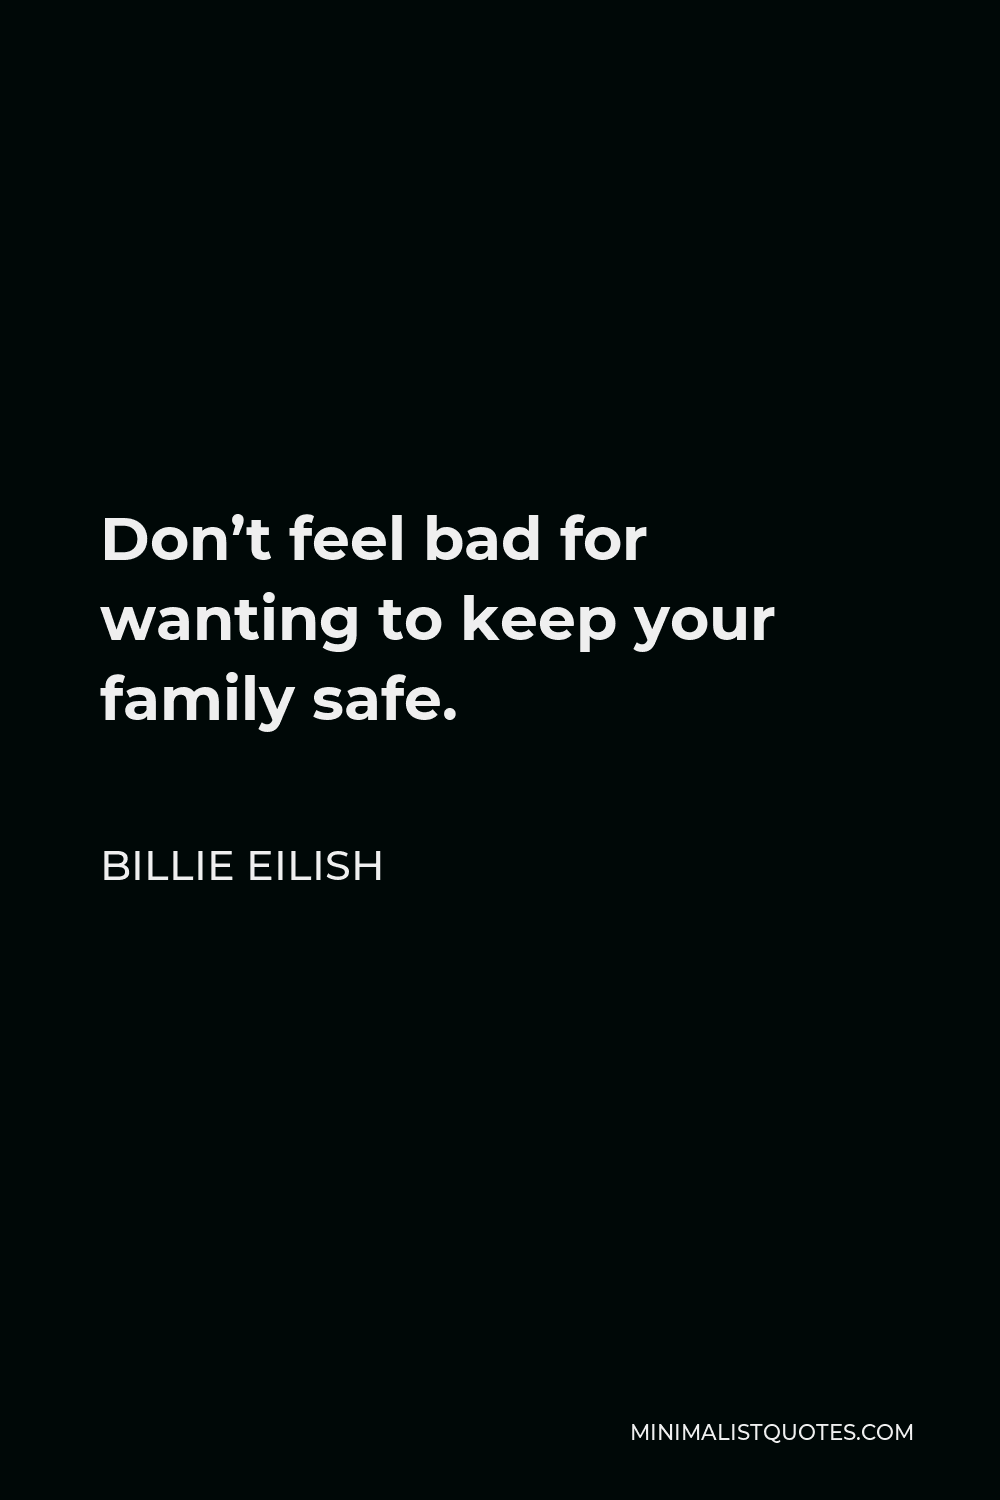 Billie Eilish Quote - Don’t feel bad for wanting to keep your family safe.